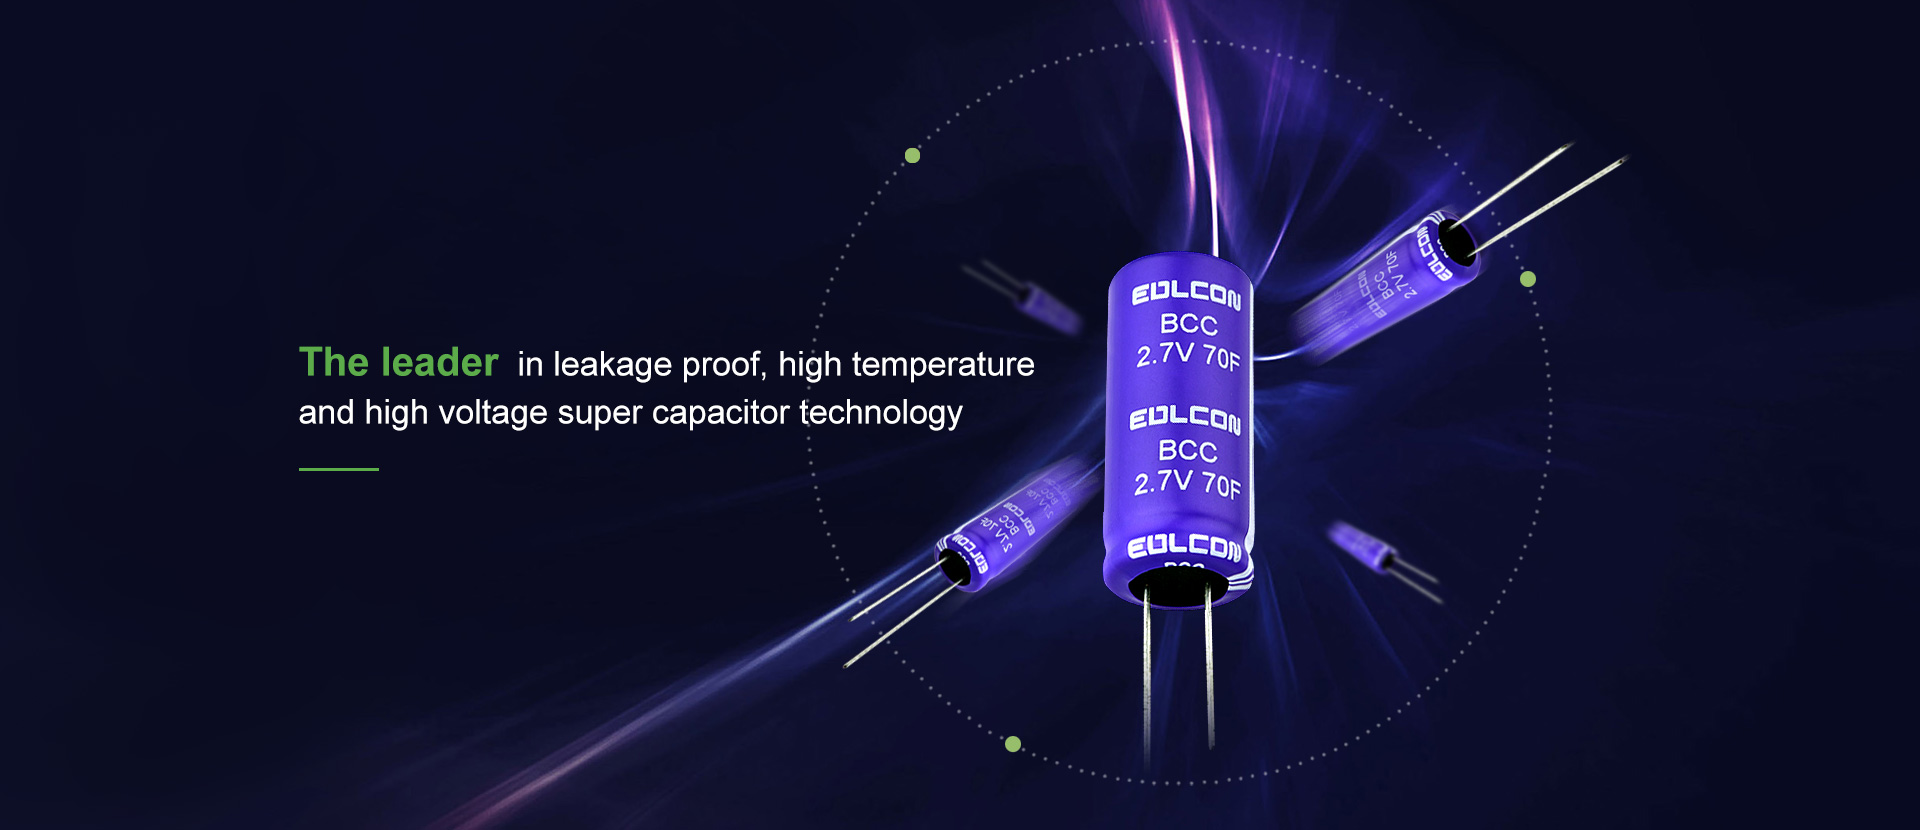 The leader in leakage proof, high temperature and high voltage super capacitor technology